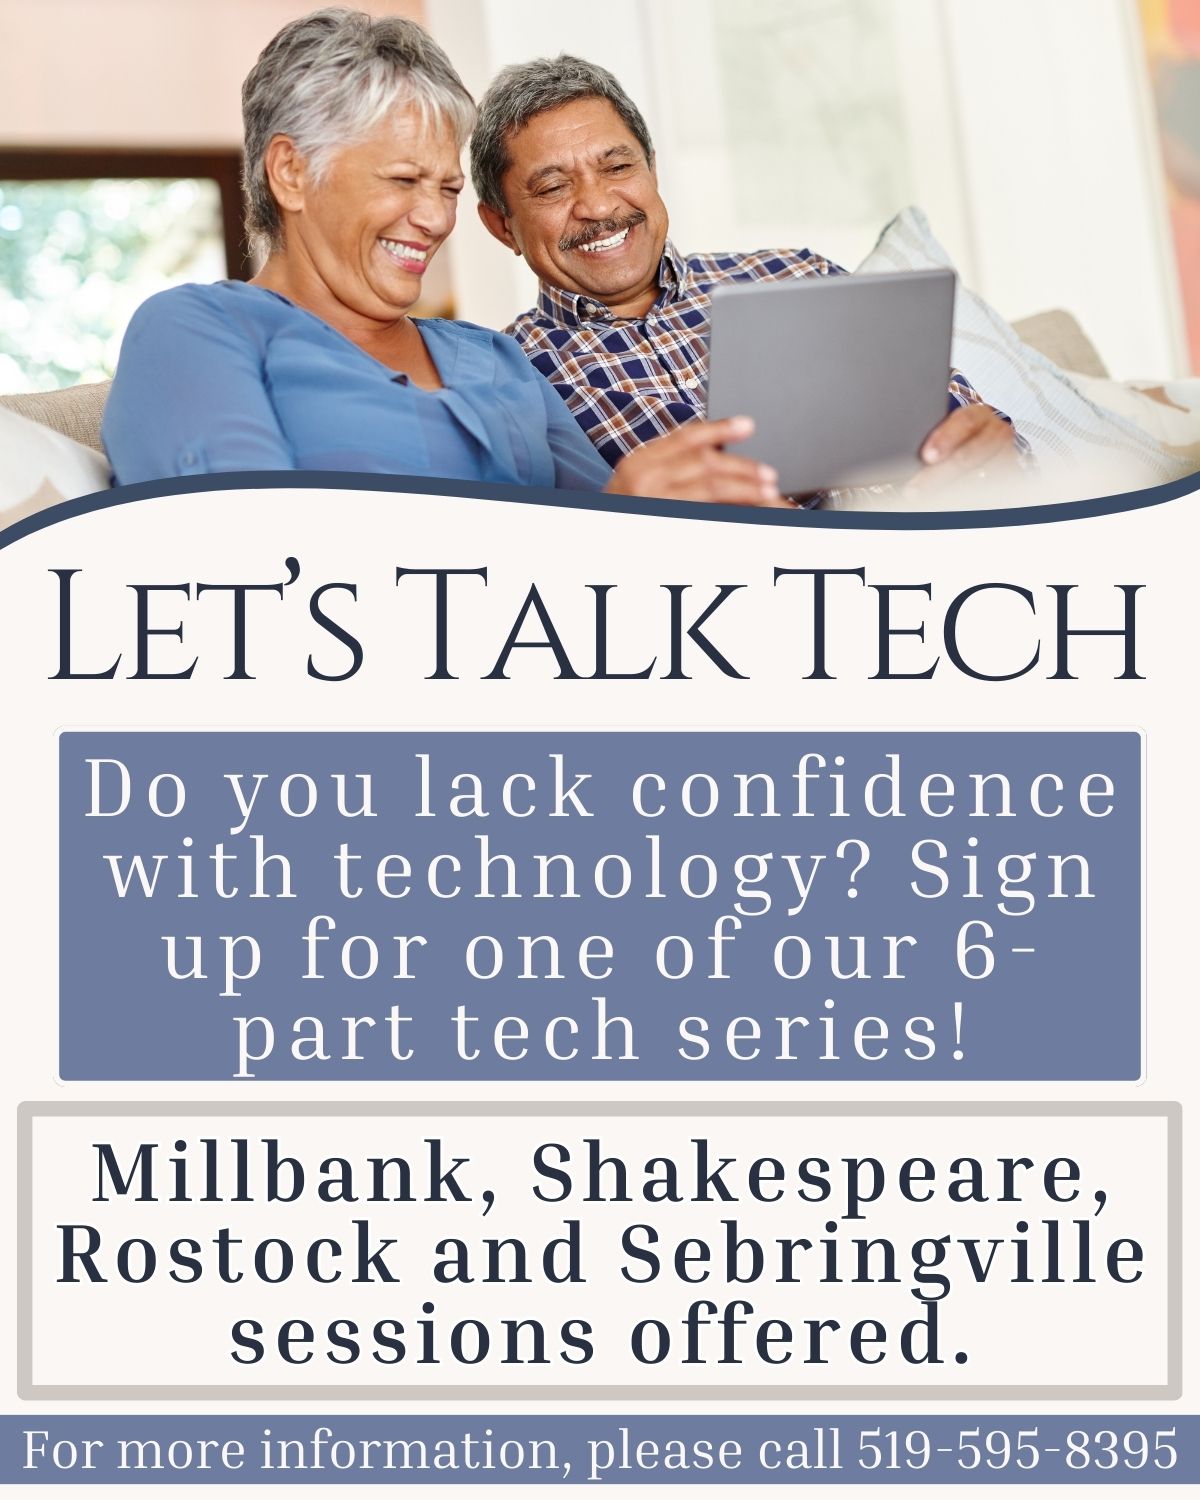 Let's Talk Tech! Do you lack confidence with techology? Sign up for one our our 6-part tech series! Millbank, Shakespeare, Rostock and Sebringville sessions offered. 